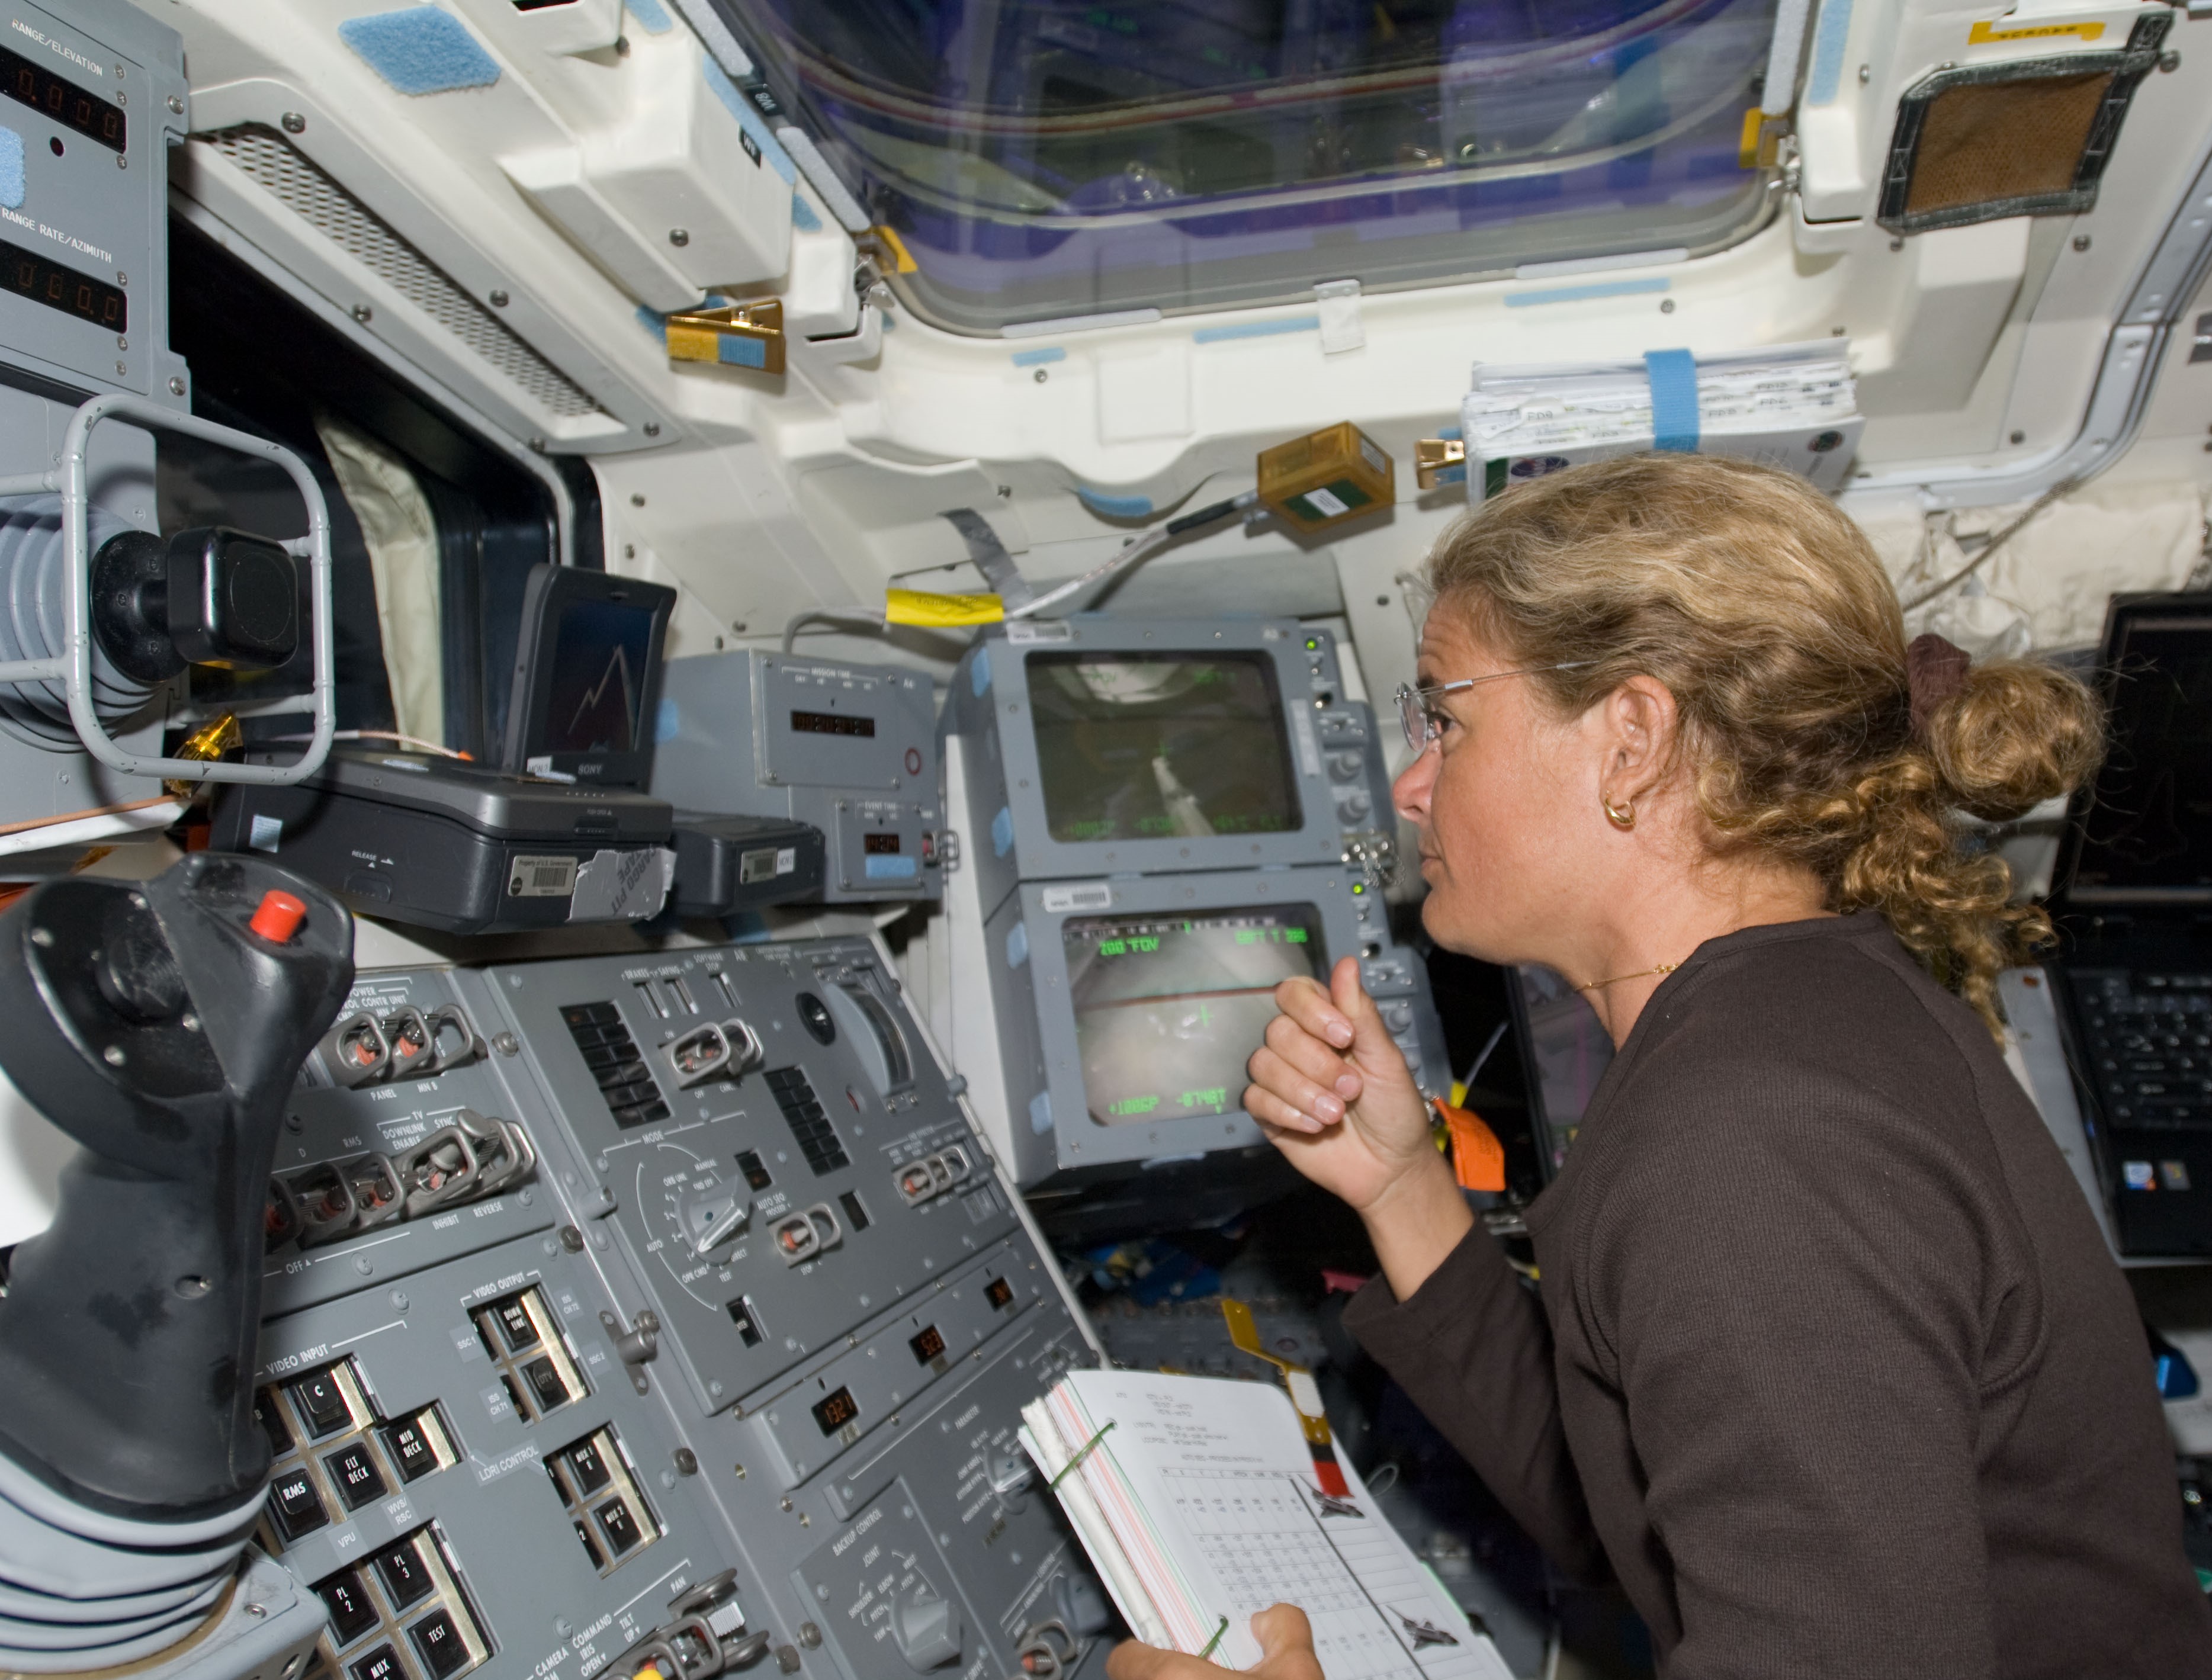 Canadian Space Agency astronaut Julie Payette operates the SRMS during the TPS inspection